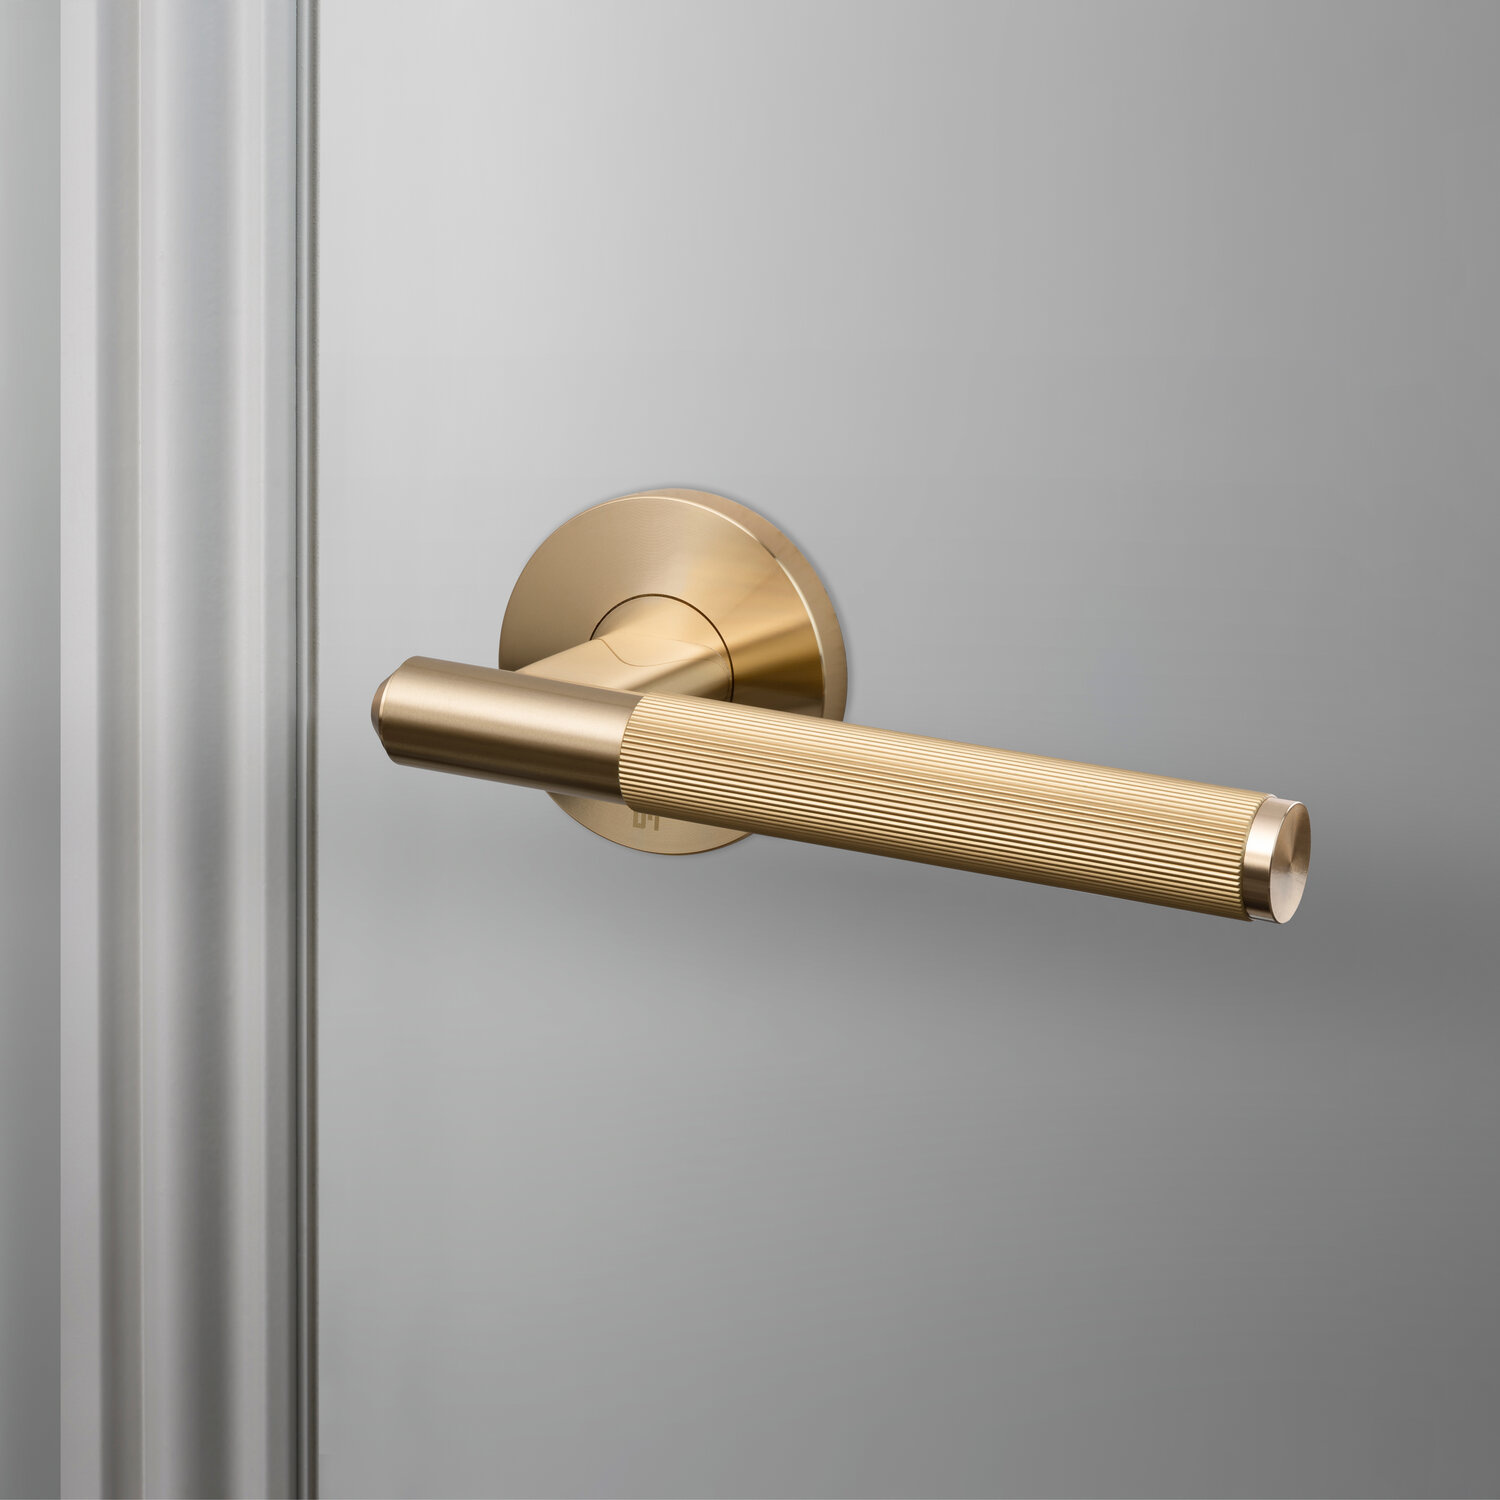 Buster+Punch Brass door handles with 'Linear' cut handle from Buster & Punch without key plates